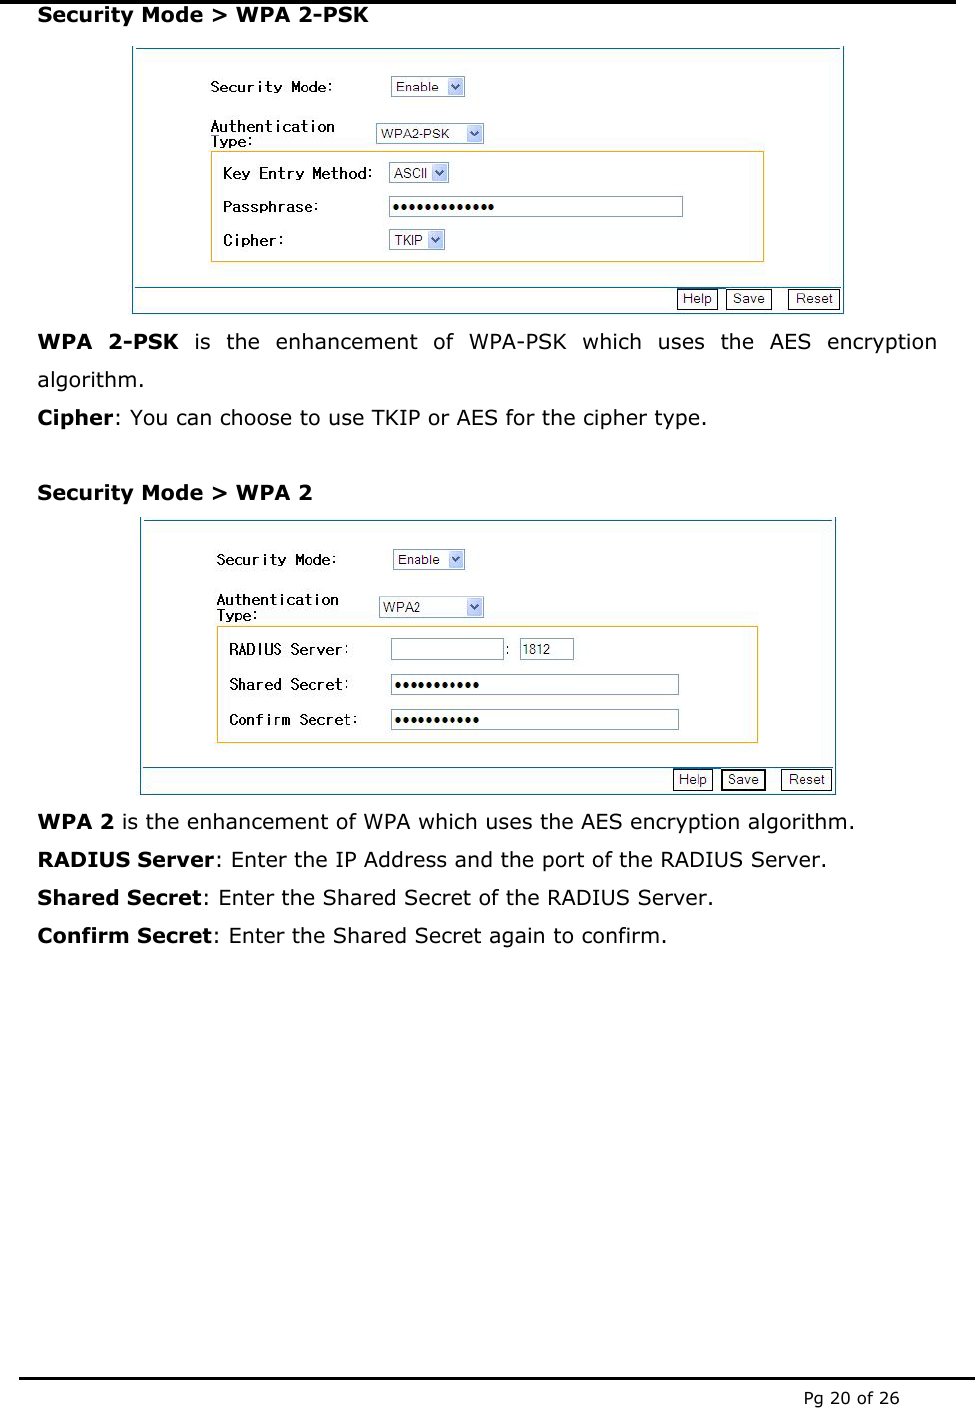  Pg 20 of 26 Security Mode &gt; WPA 2-PSK  WPA 2-PSK is the enhancement of WPA-PSK which uses the AES encryption algorithm. Cipher: You can choose to use TKIP or AES for the cipher type.  Security Mode &gt; WPA 2  WPA 2 is the enhancement of WPA which uses the AES encryption algorithm. RADIUS Server: Enter the IP Address and the port of the RADIUS Server. Shared Secret: Enter the Shared Secret of the RADIUS Server.  Confirm Secret: Enter the Shared Secret again to confirm.         